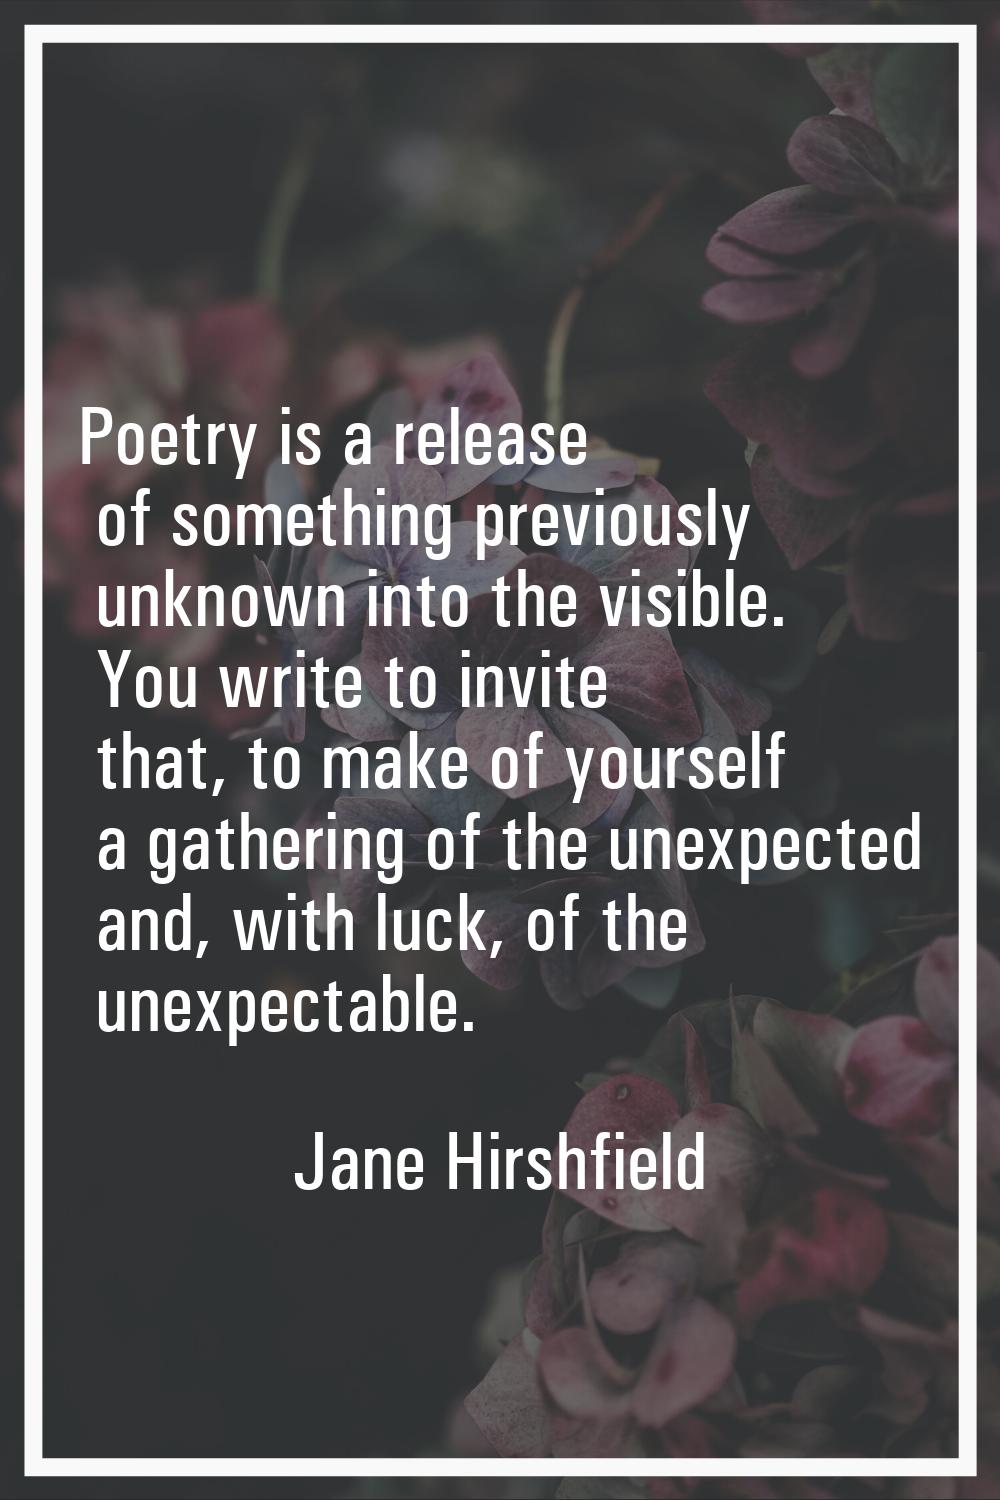 Poetry is a release of something previously unknown into the visible. You write to invite that, to 